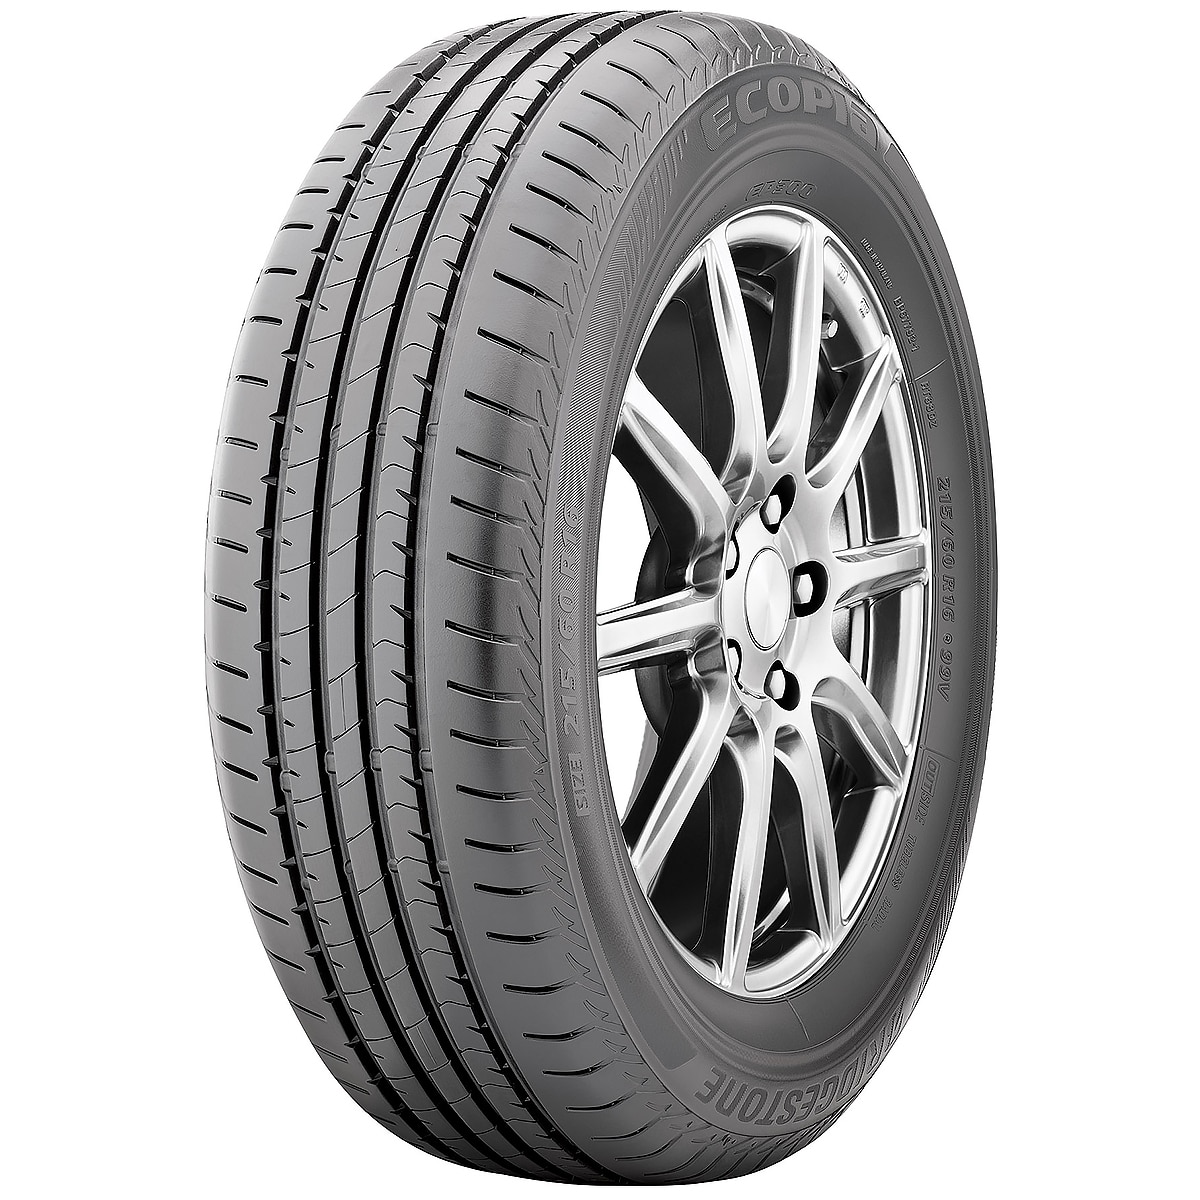 195/65R15 91V BS EP300 - Tyre